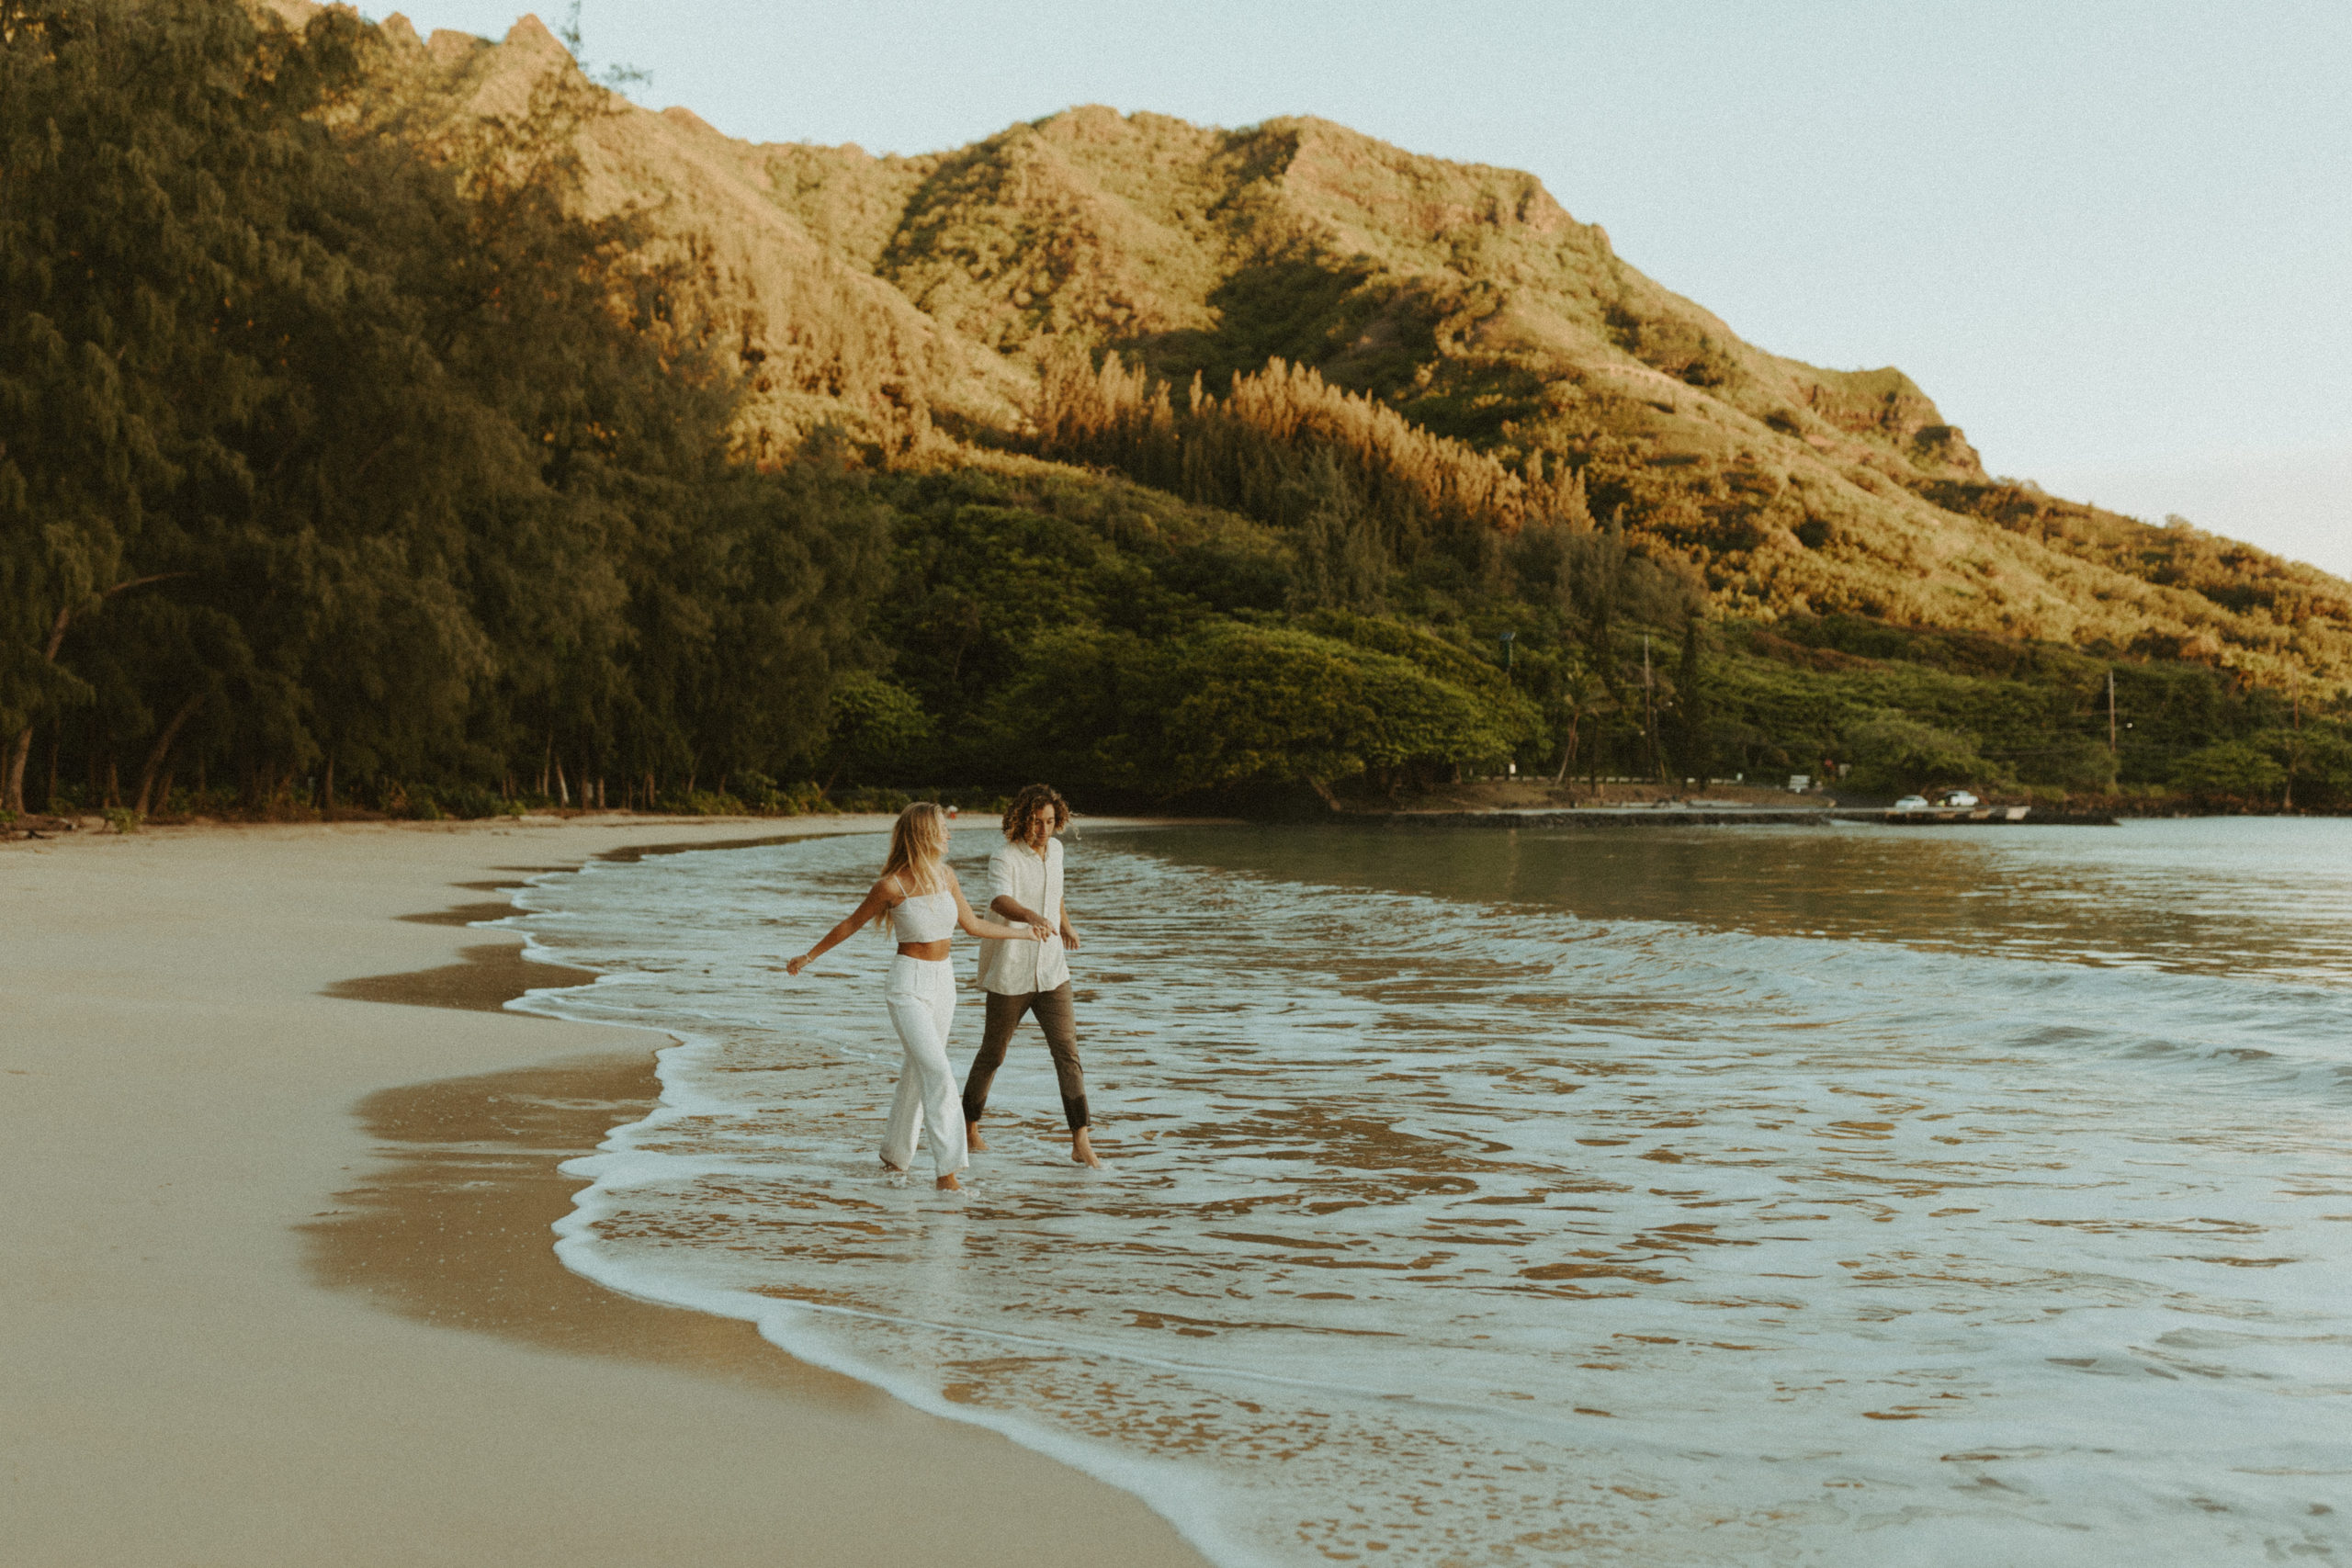 the couple running through the water in Hawaii